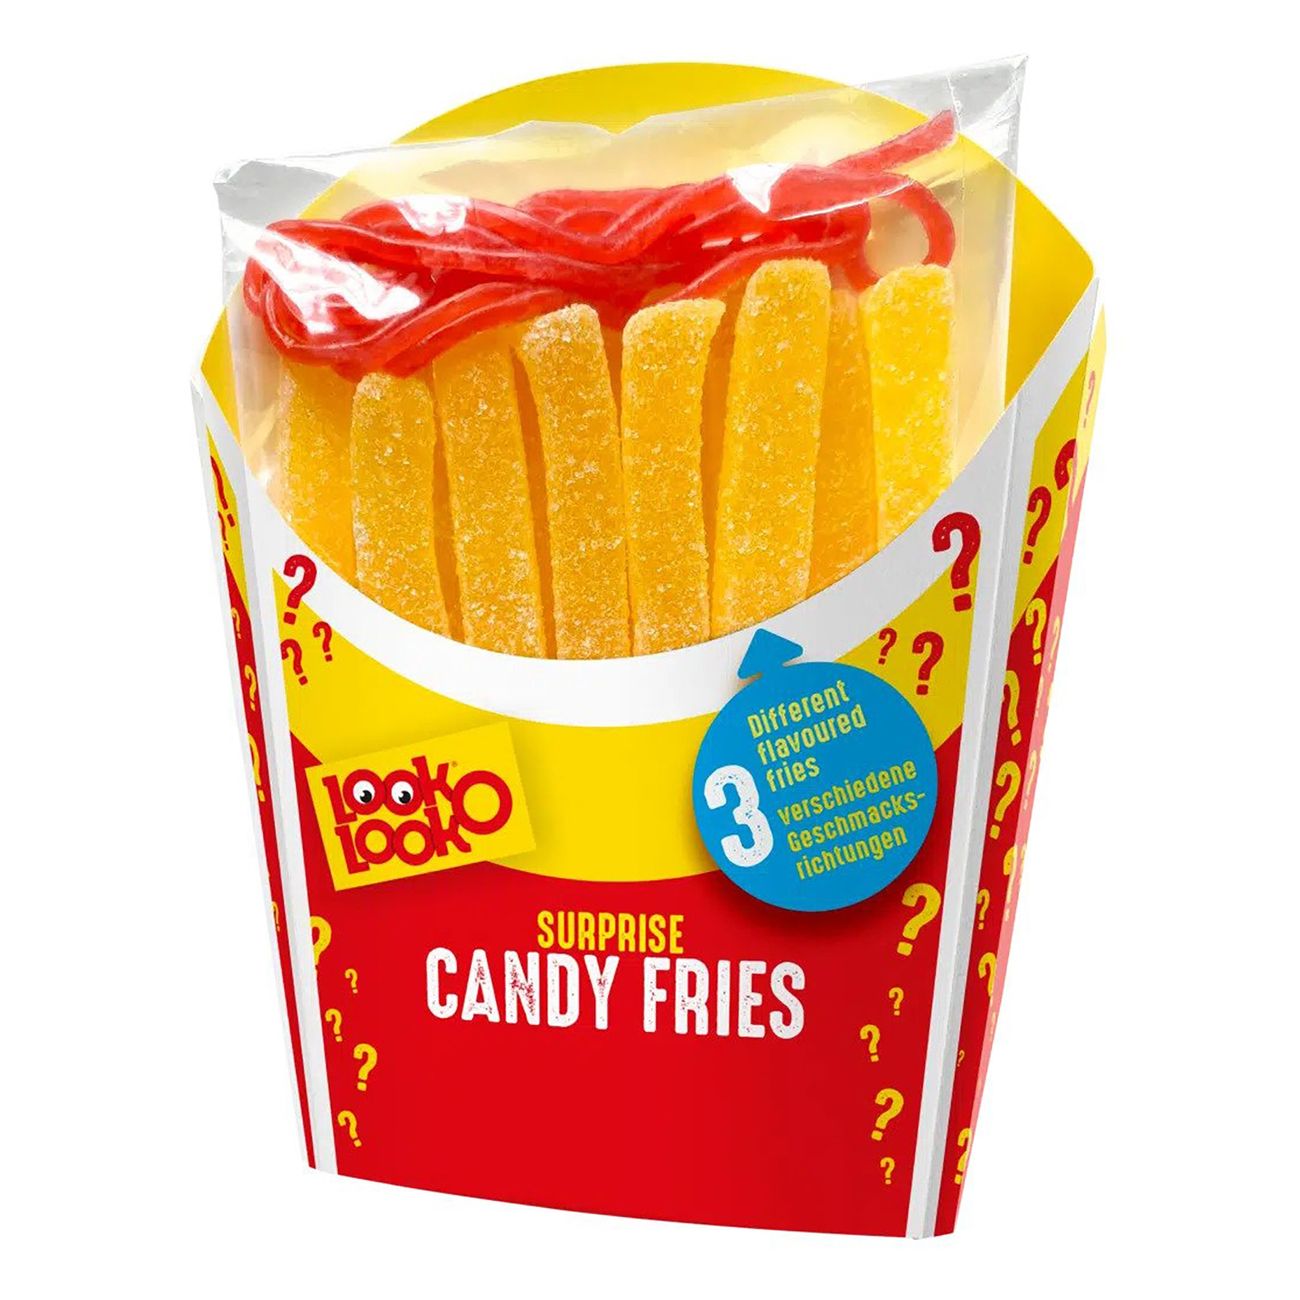 look-o-look-candy-fries-86526-1